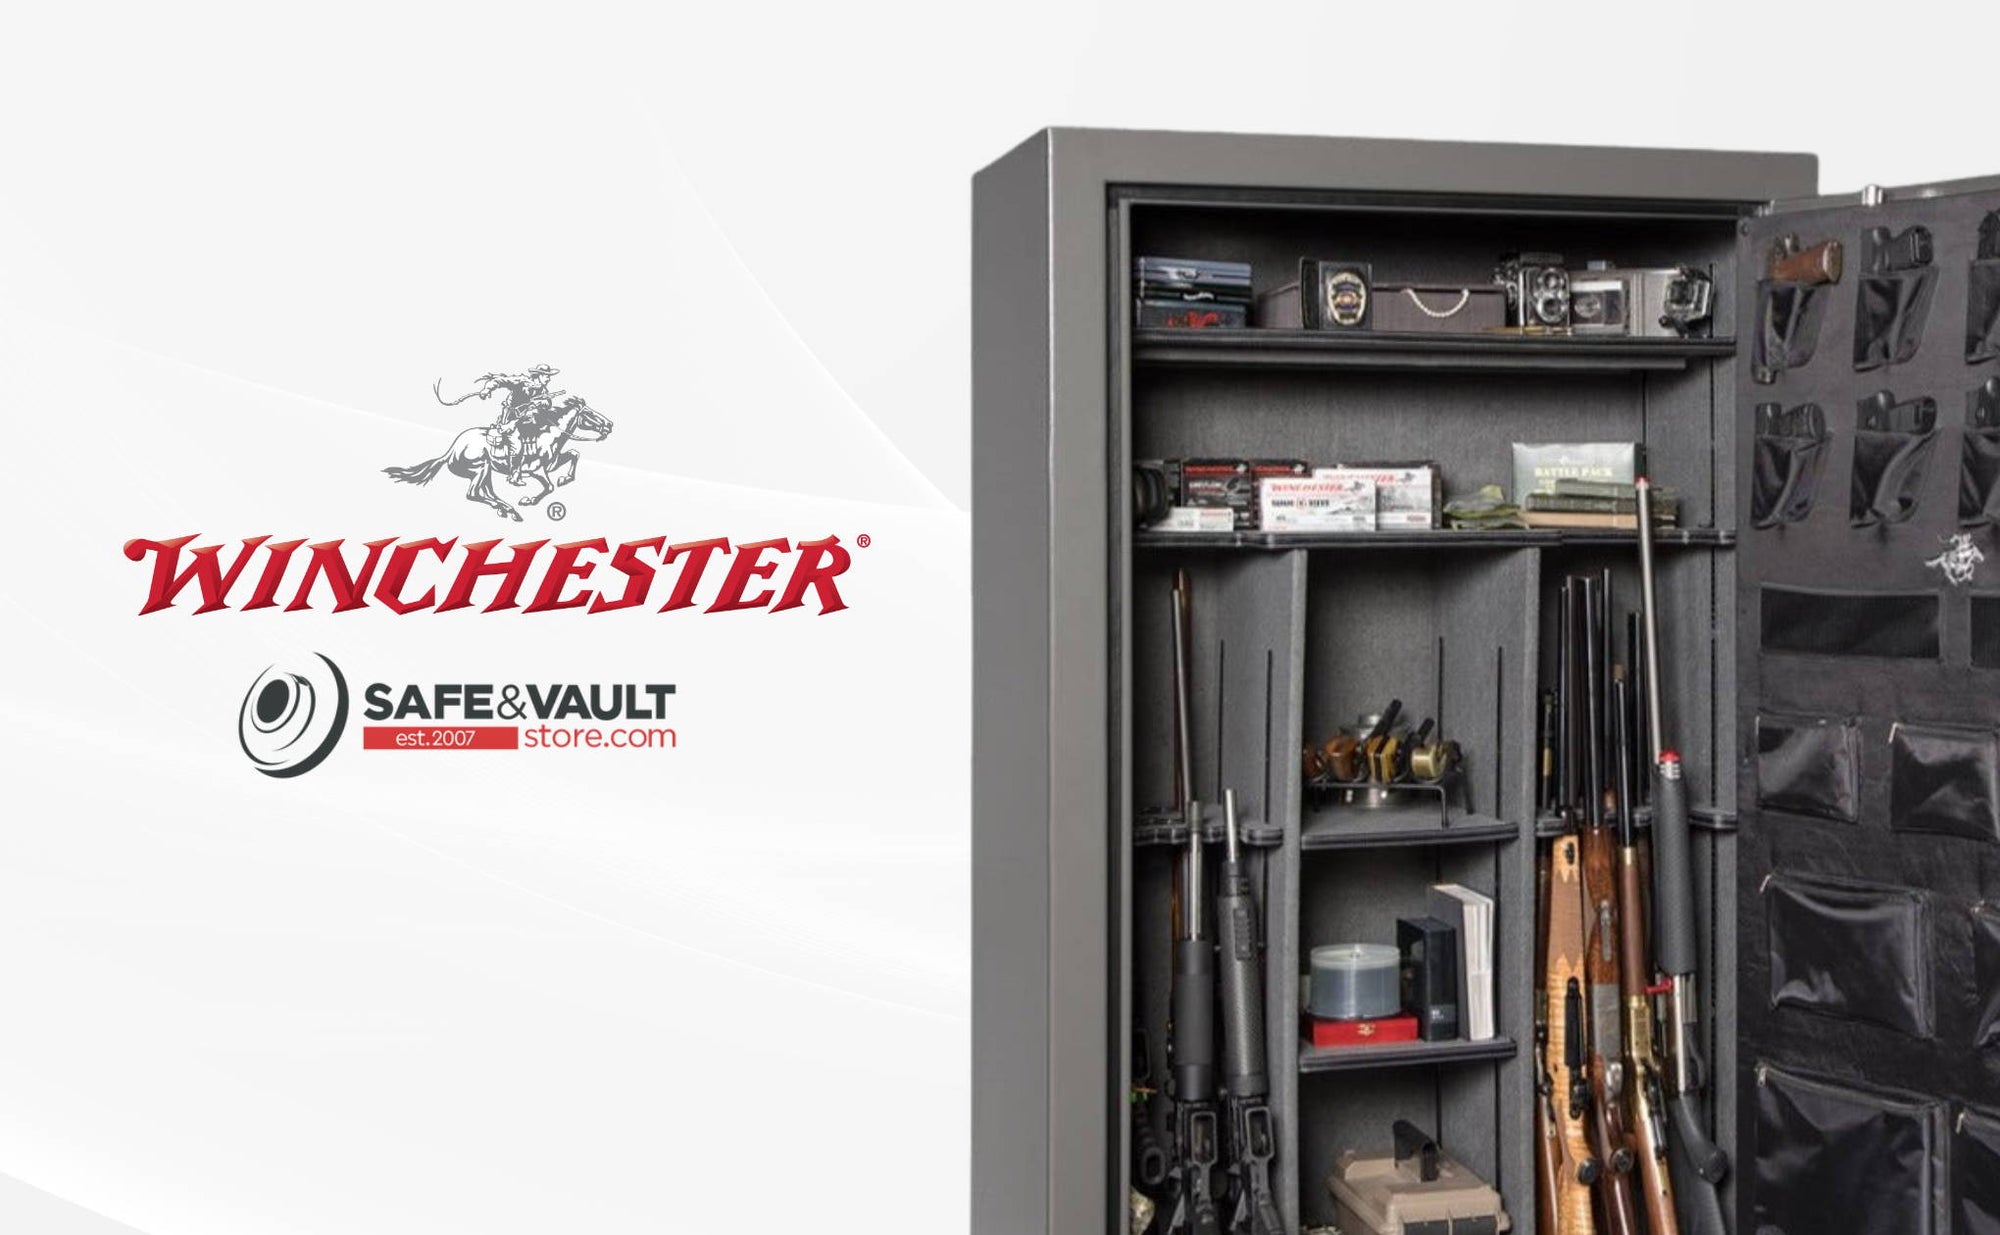 Let's Take a Look at Winchester Gun Safes